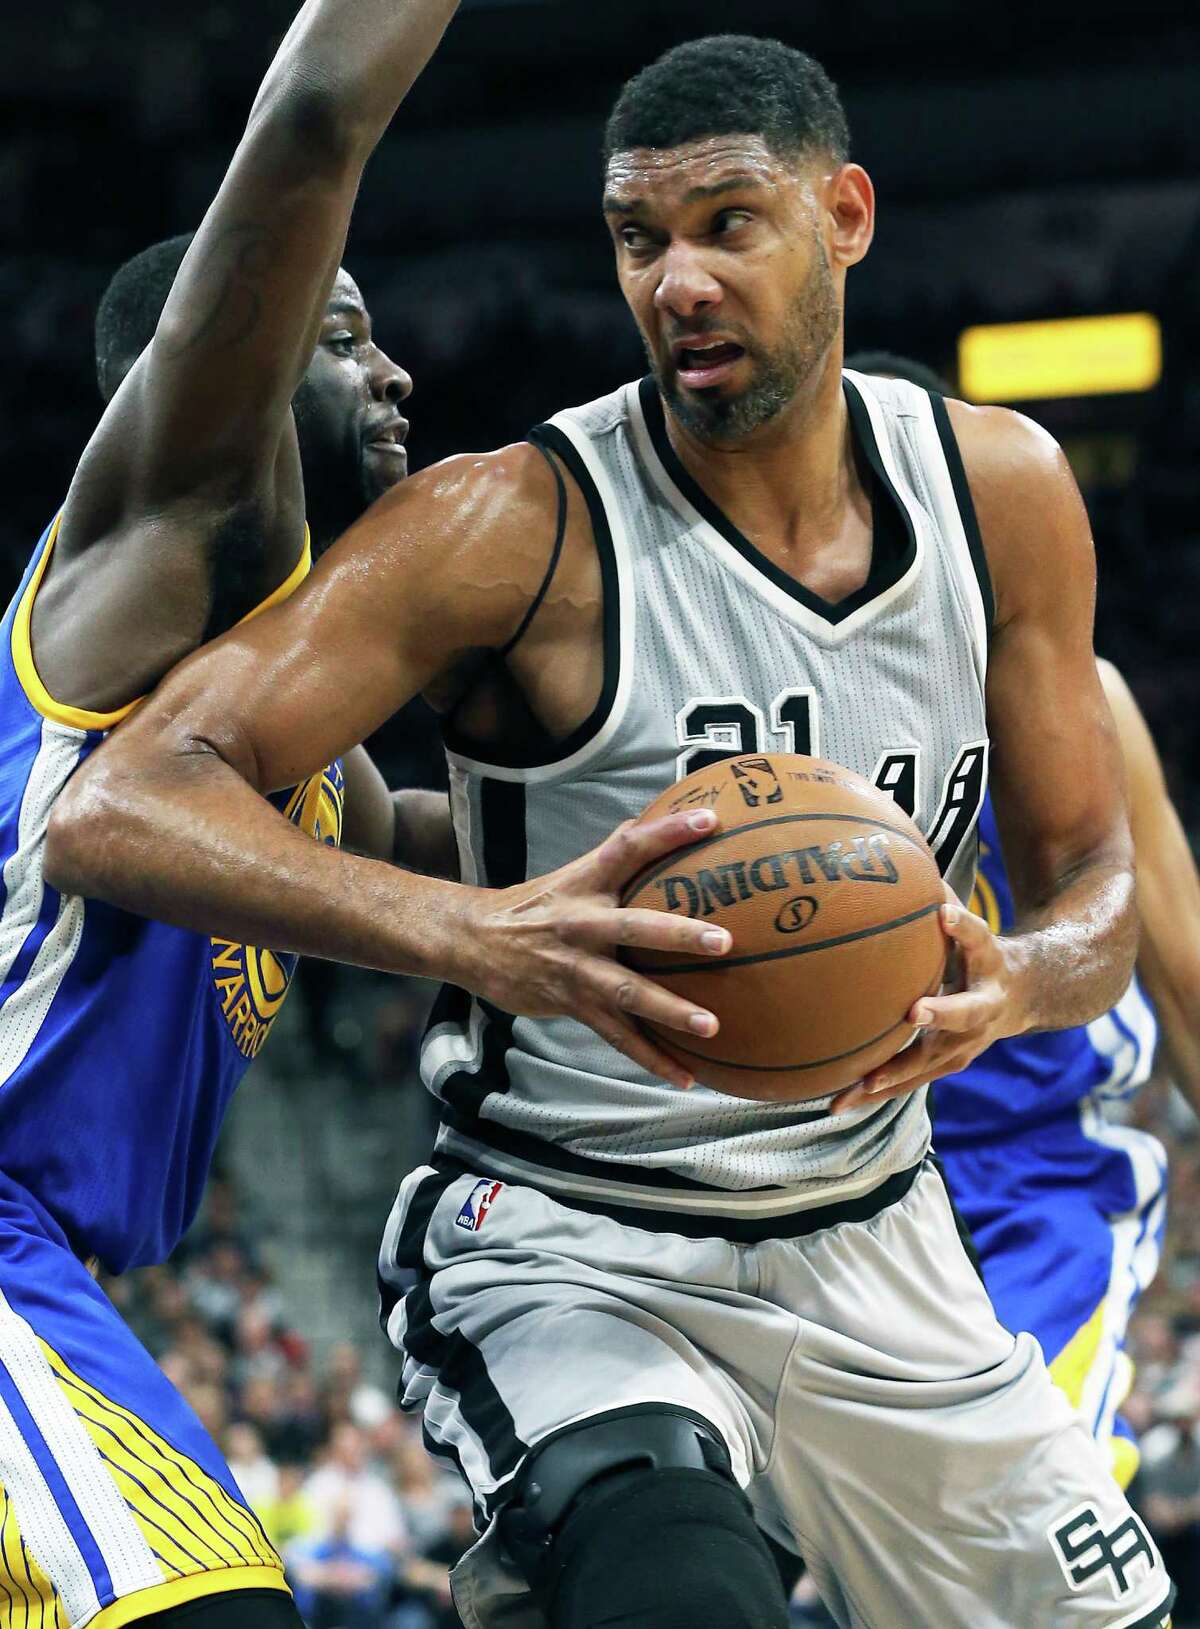 Tim Duncan pivots in the lane as the Spurs host the Warriors at the AT&T Center on March 19, 2016.